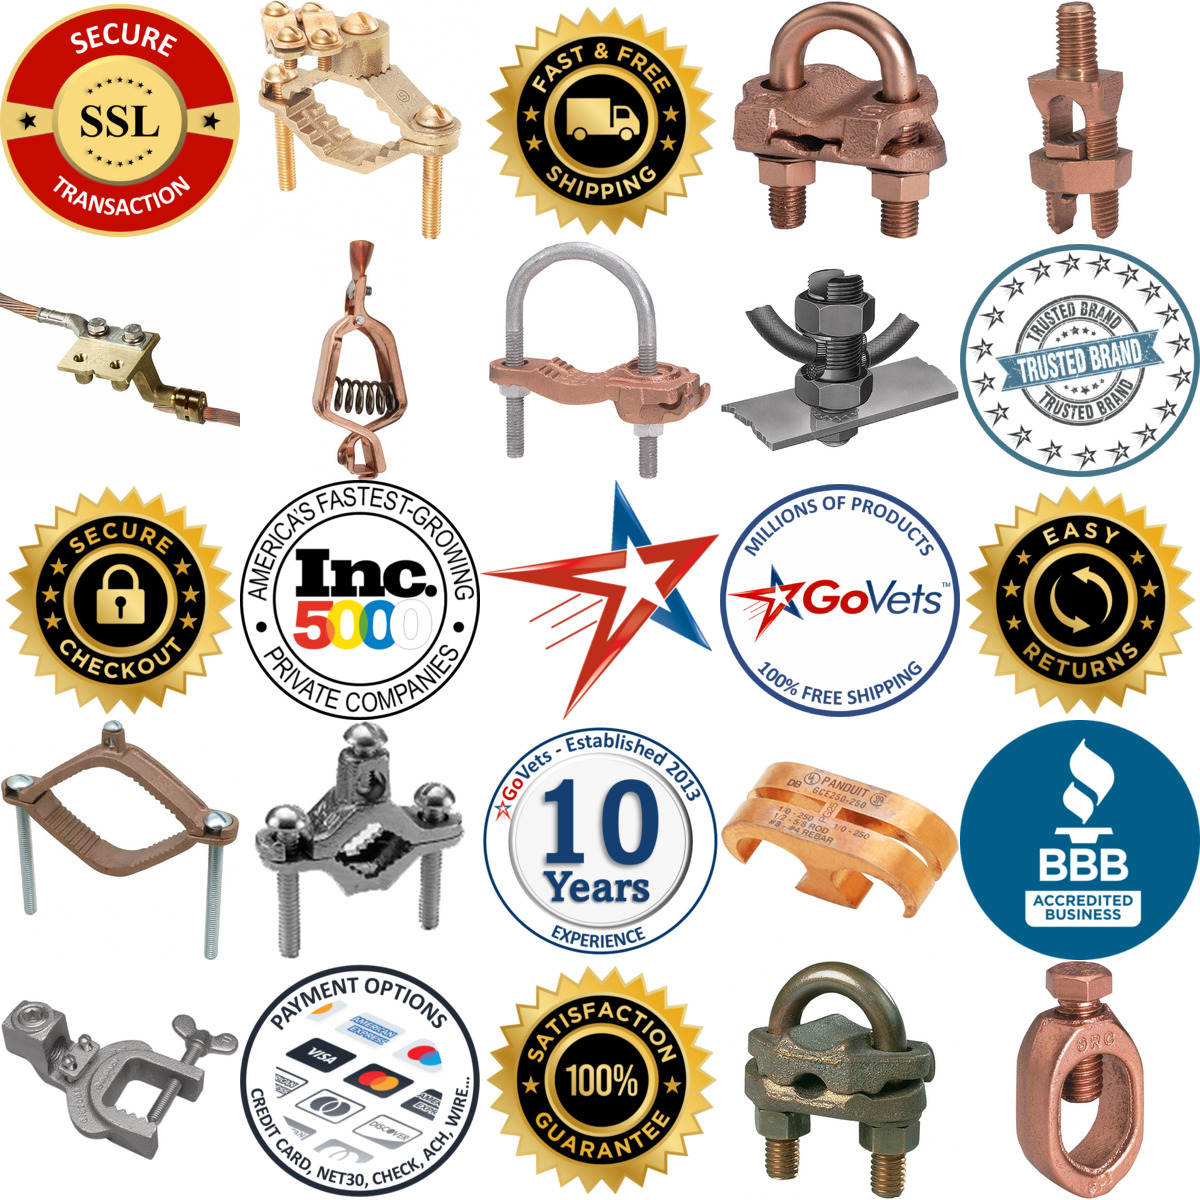 A selection of Grounding Clamps products on GoVets